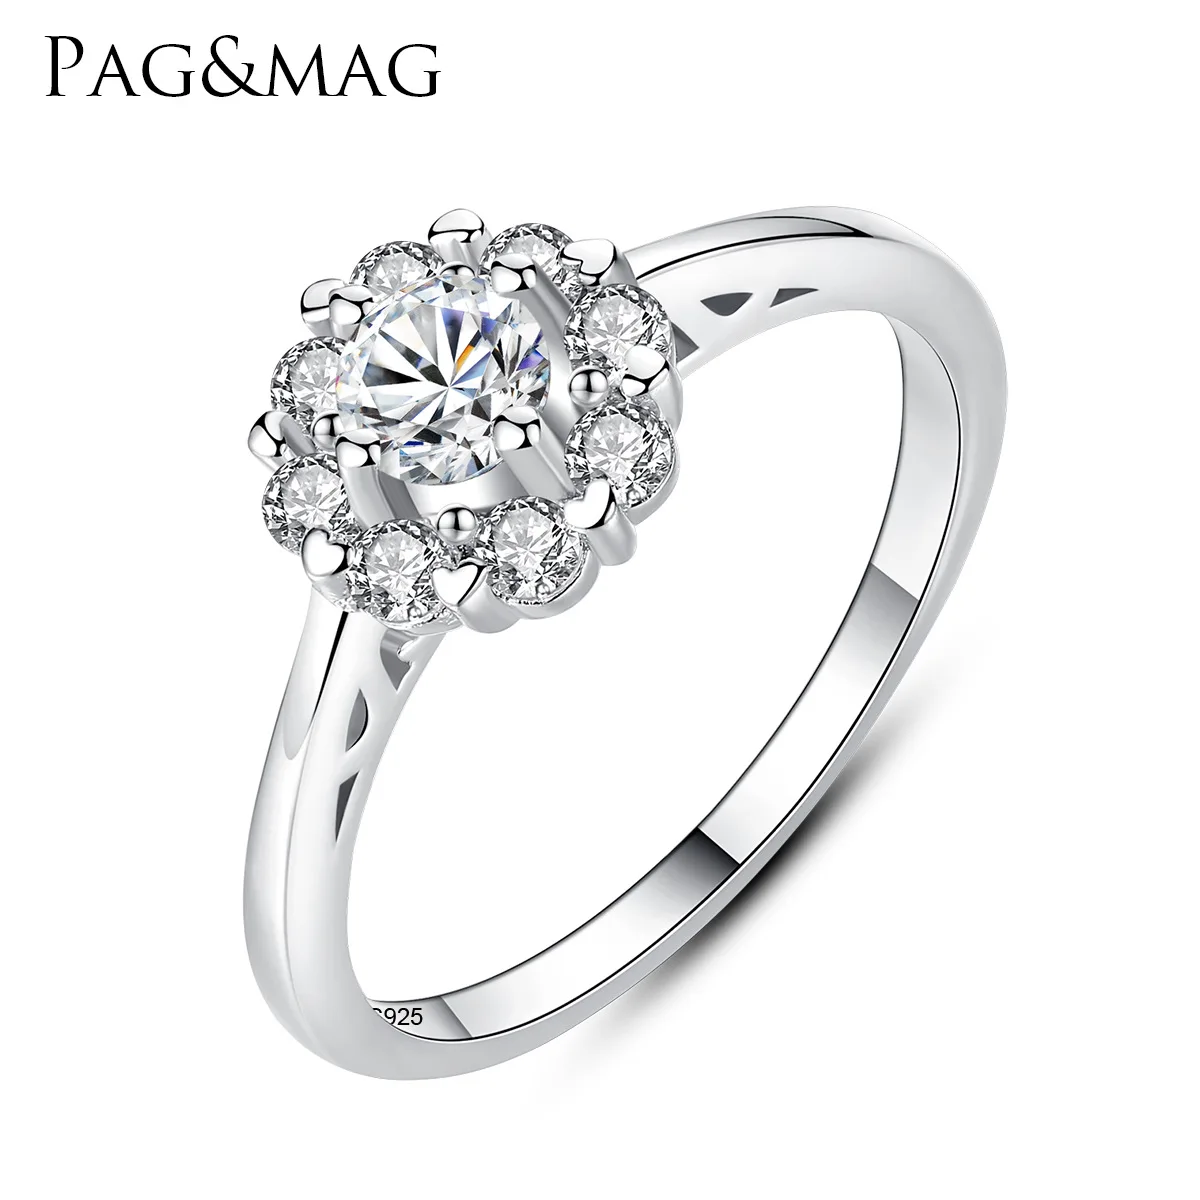 

PAG-MAG S925 Sterling Silver Ring Micro-set 3A Zircon Fashion Boutique Flower Wedding Women's Ring